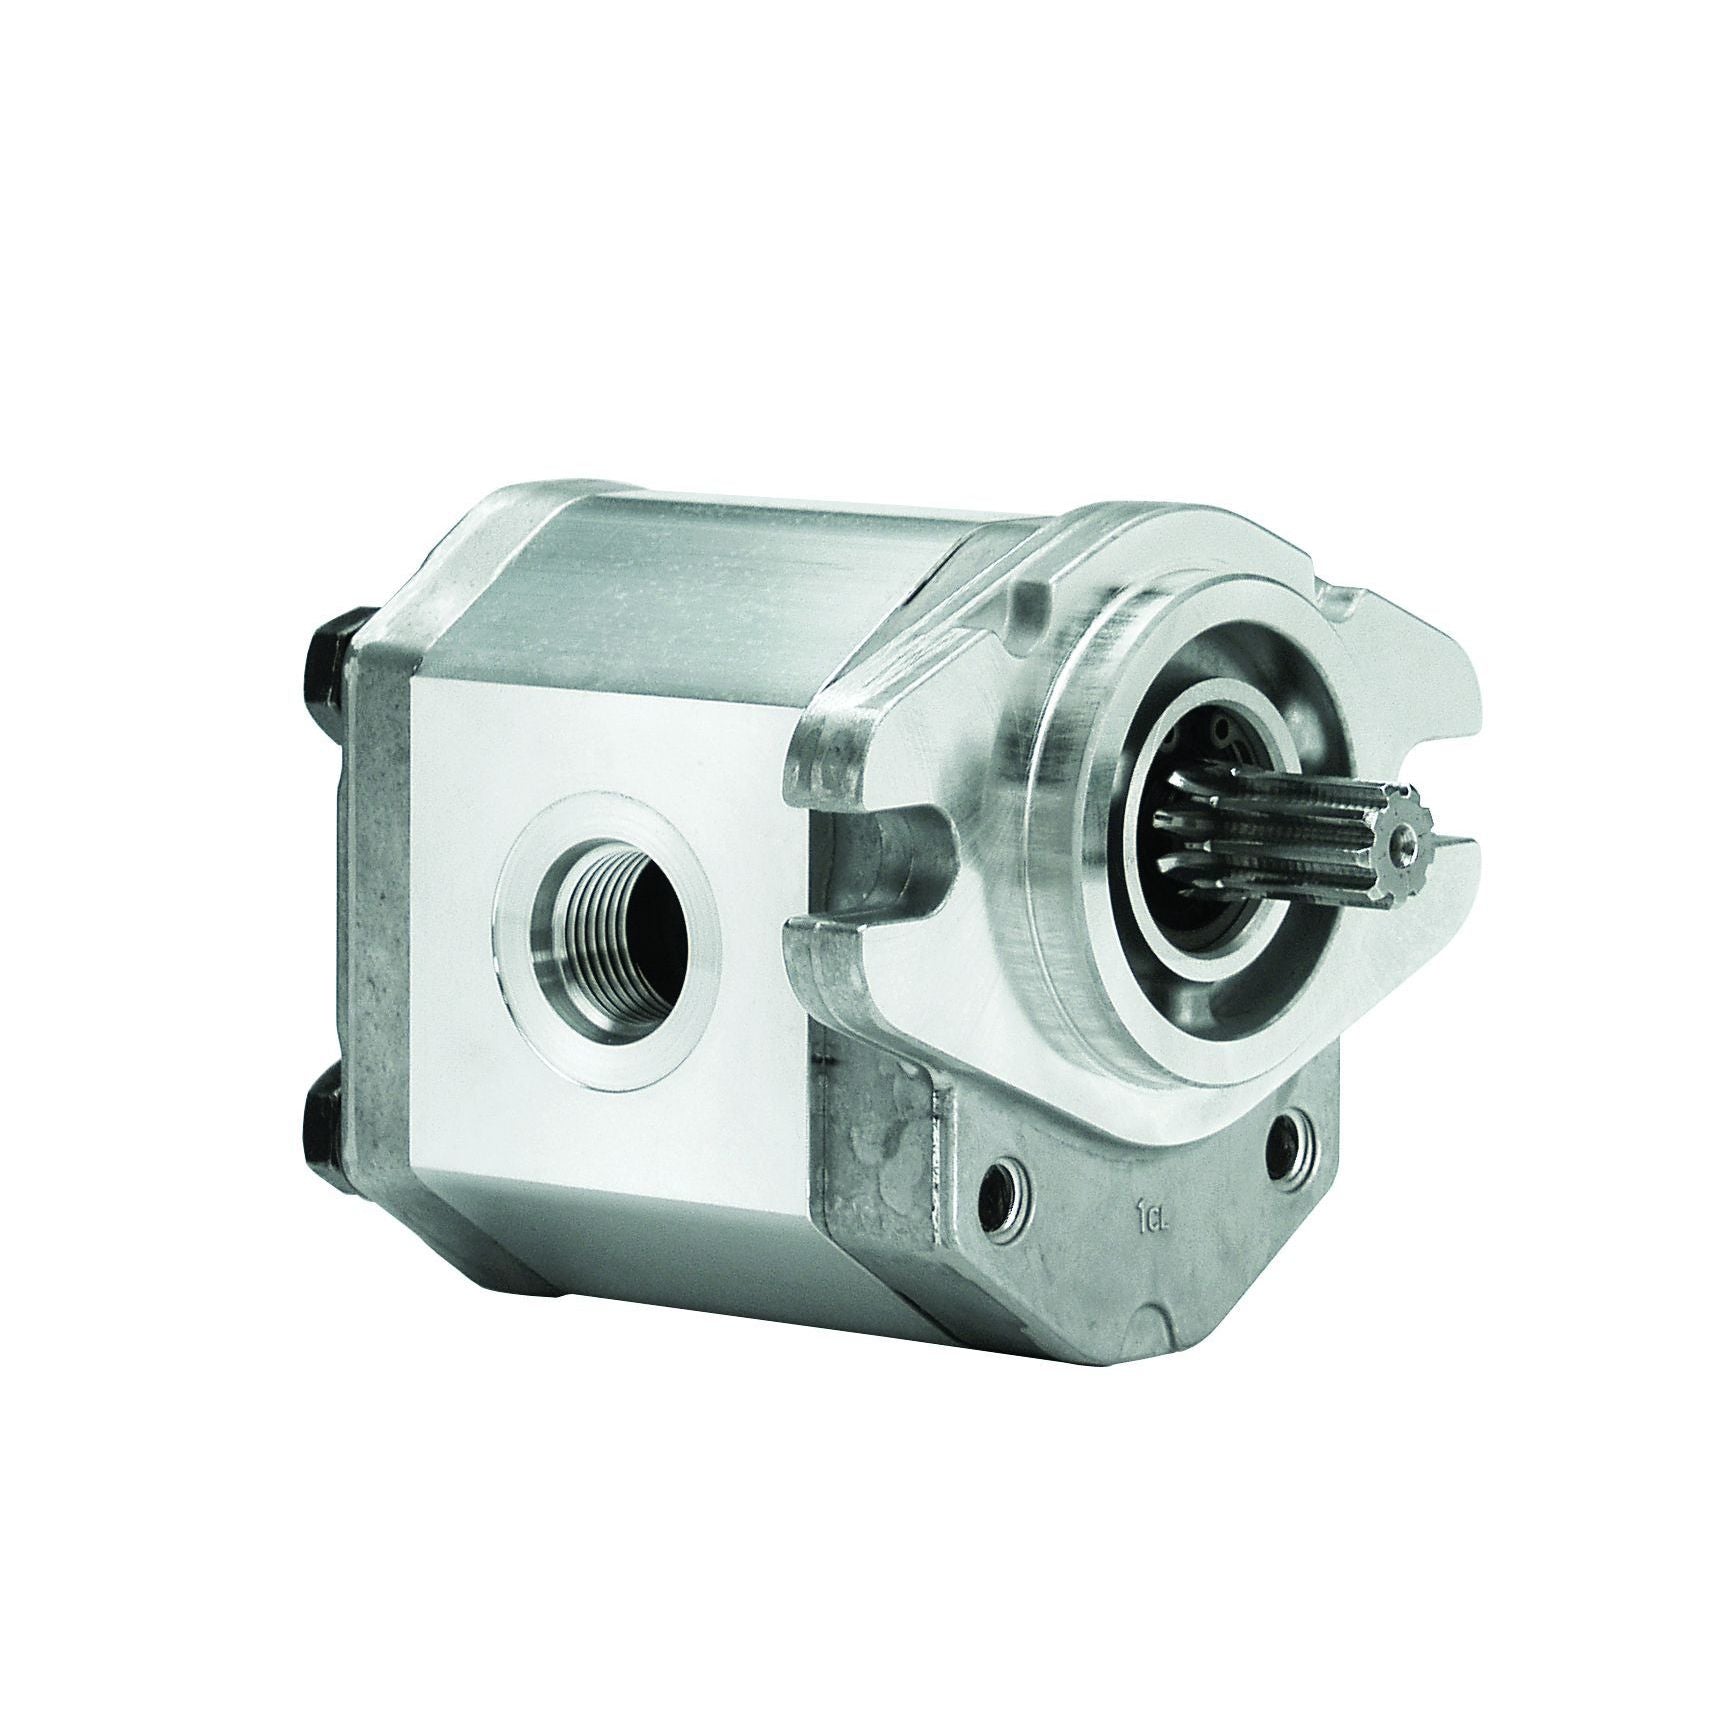 ALP1A-D-3-S1 : Marzocchi Gear Pump, CW, 2.1cc (0.1281in3), 1 GPM, 3625psi, 6000 RPM, #8 SAE (1/2") In, #6 SAE (3/8") Out, Splined Shaft 9T 20/40DP, SAE AA 2-Bolt Mount